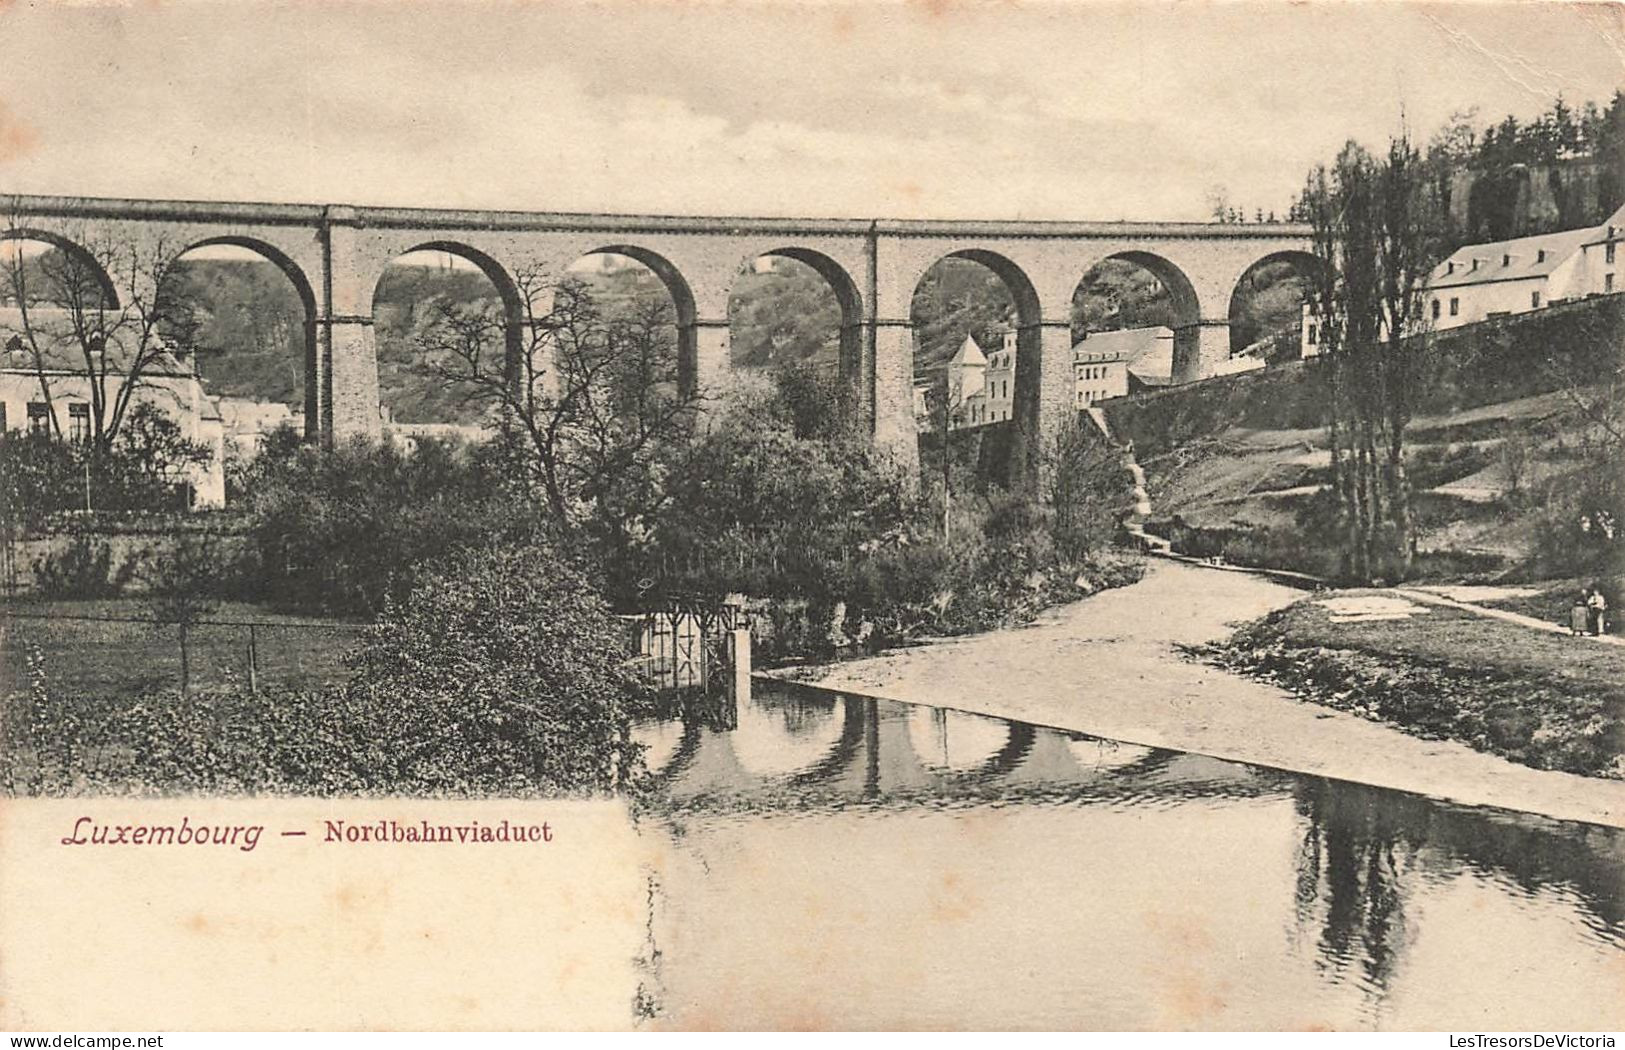 LUXEMBOURG - Nordbahnviaduct - Carte Postale Ancienne - Luxemburg - Town